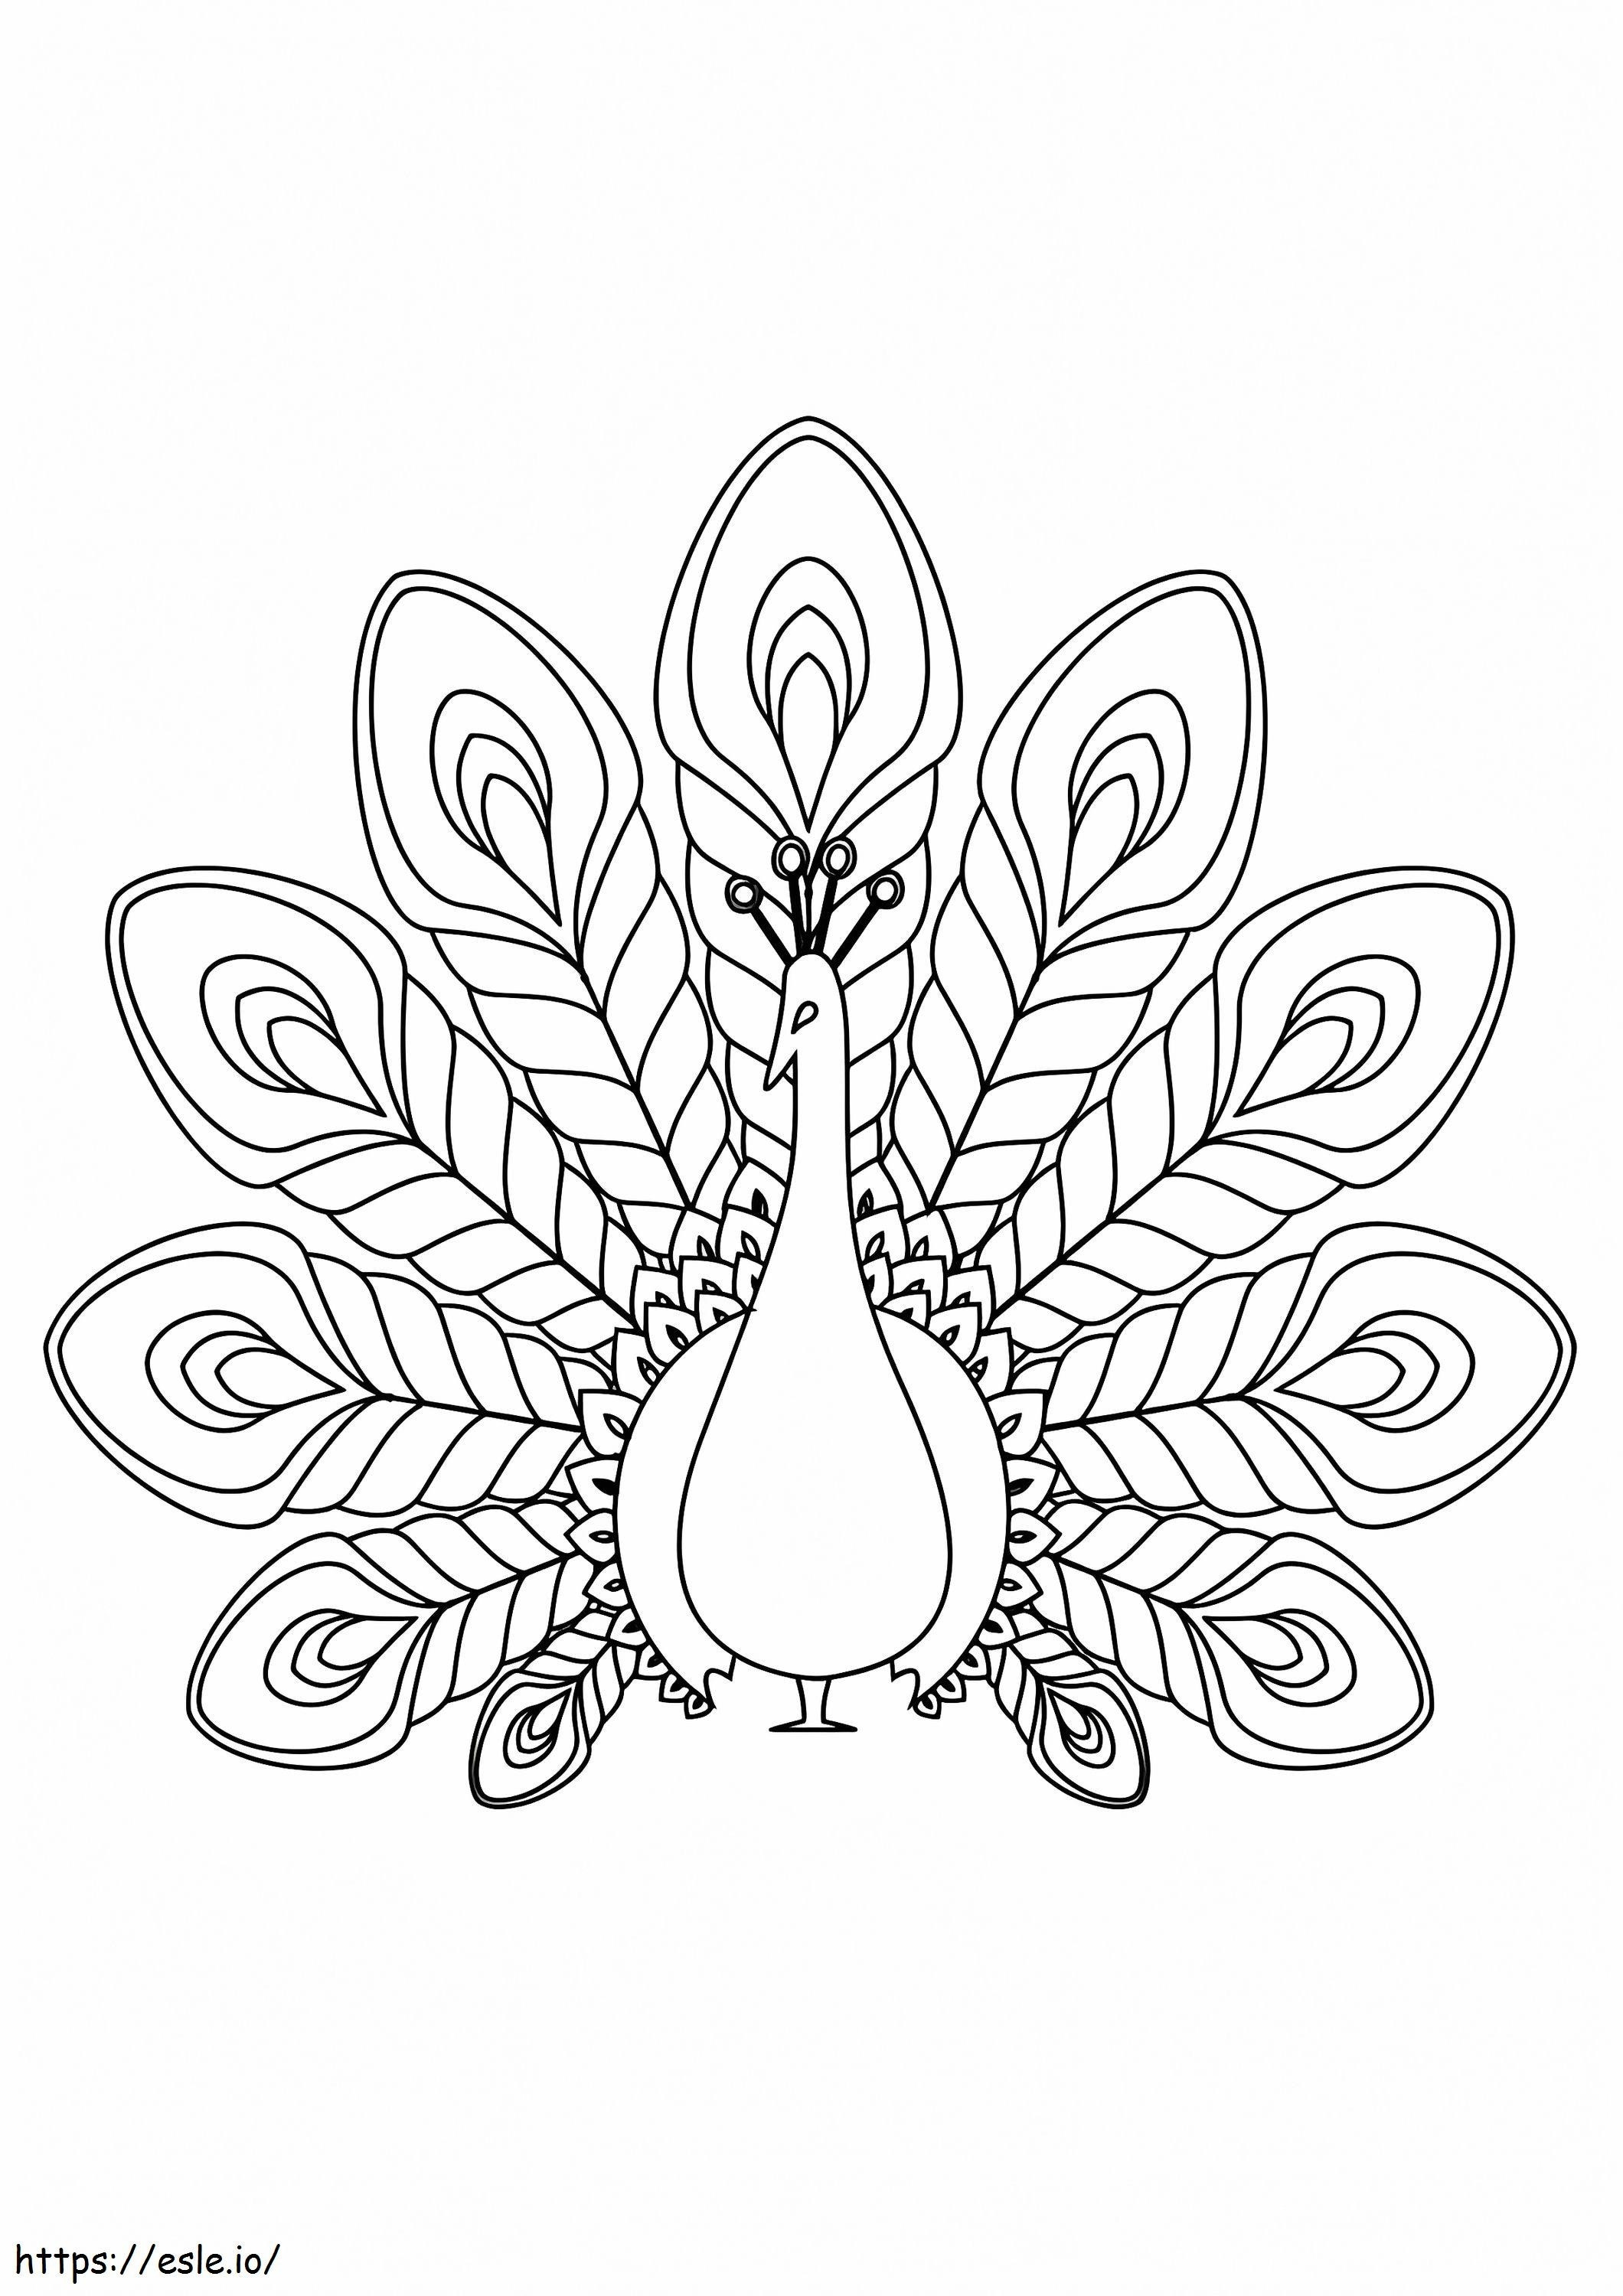 Stunning Peacock coloring page